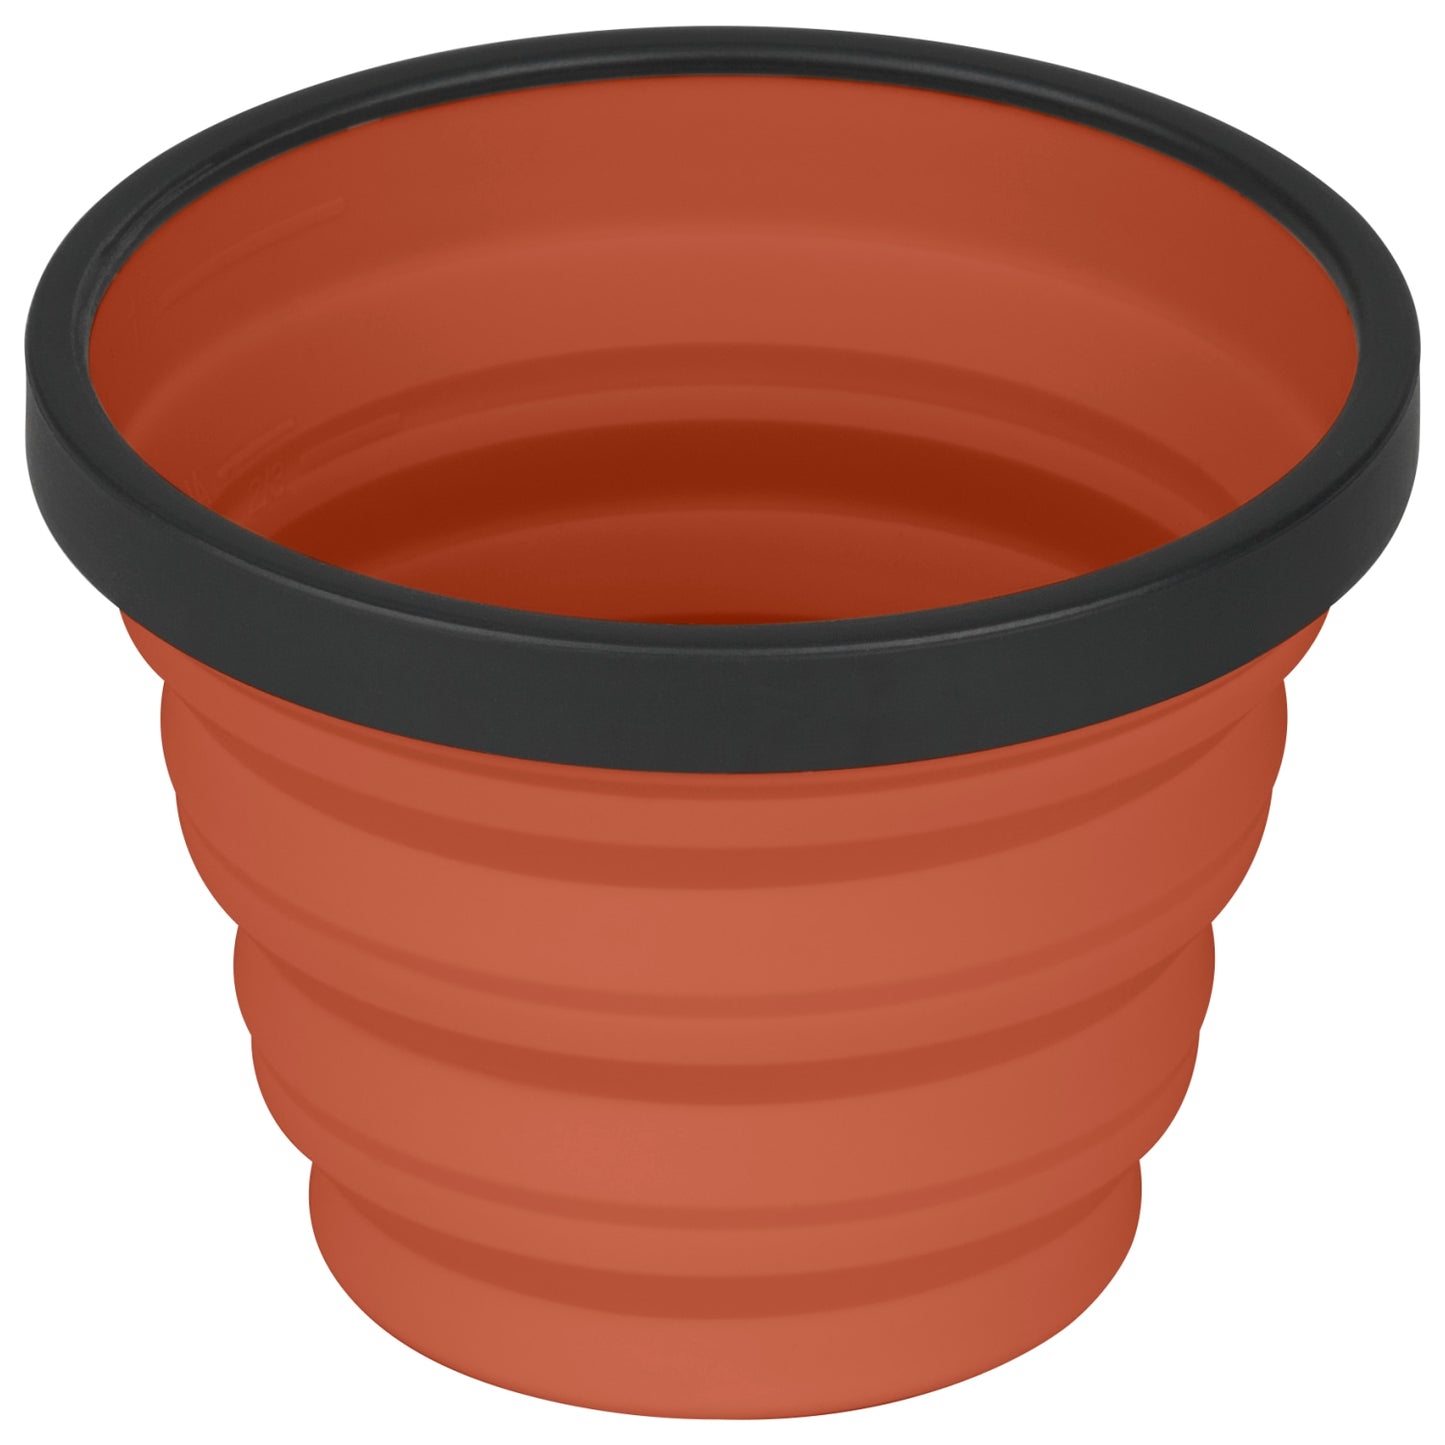 Rust orange silicone collapsible X cup by Sea to Summit.